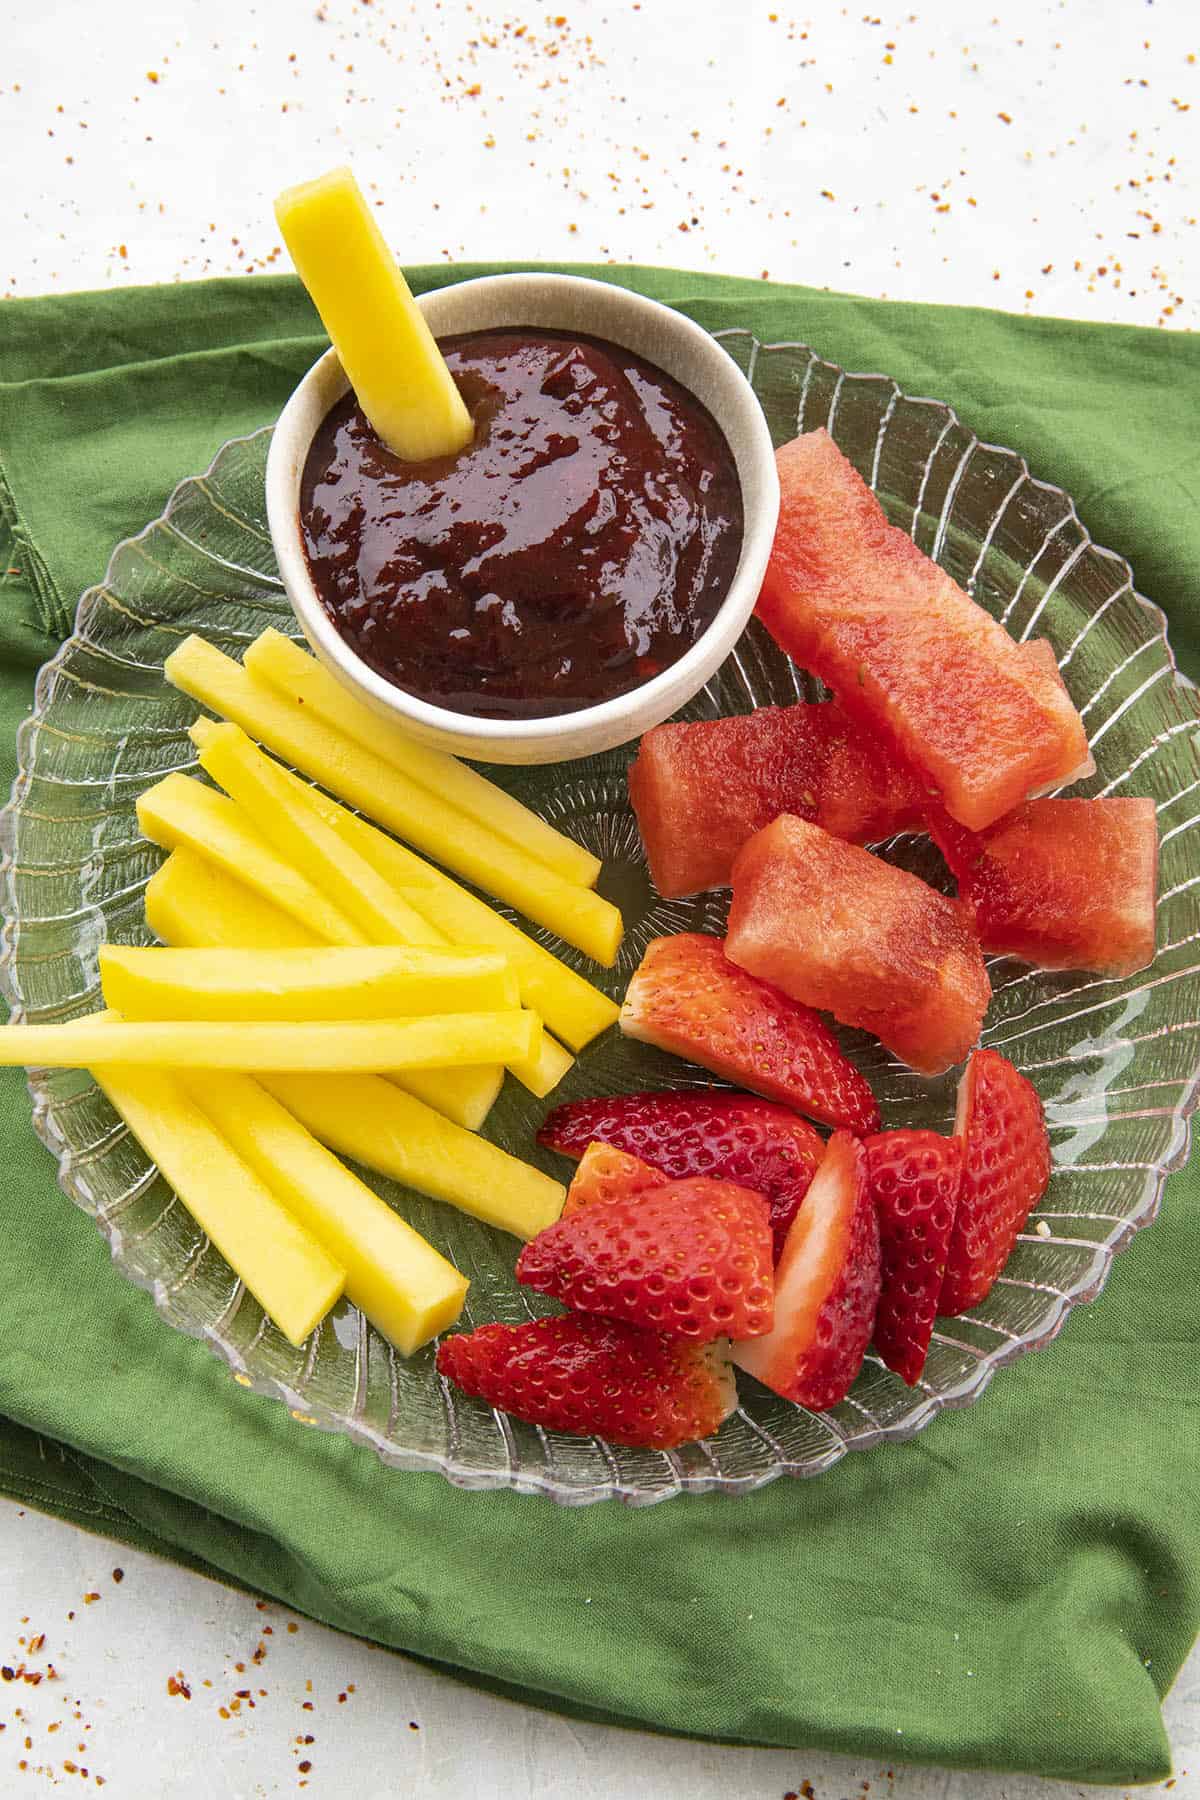 Fruit served on a platter with Chamoy Sauce for dipping